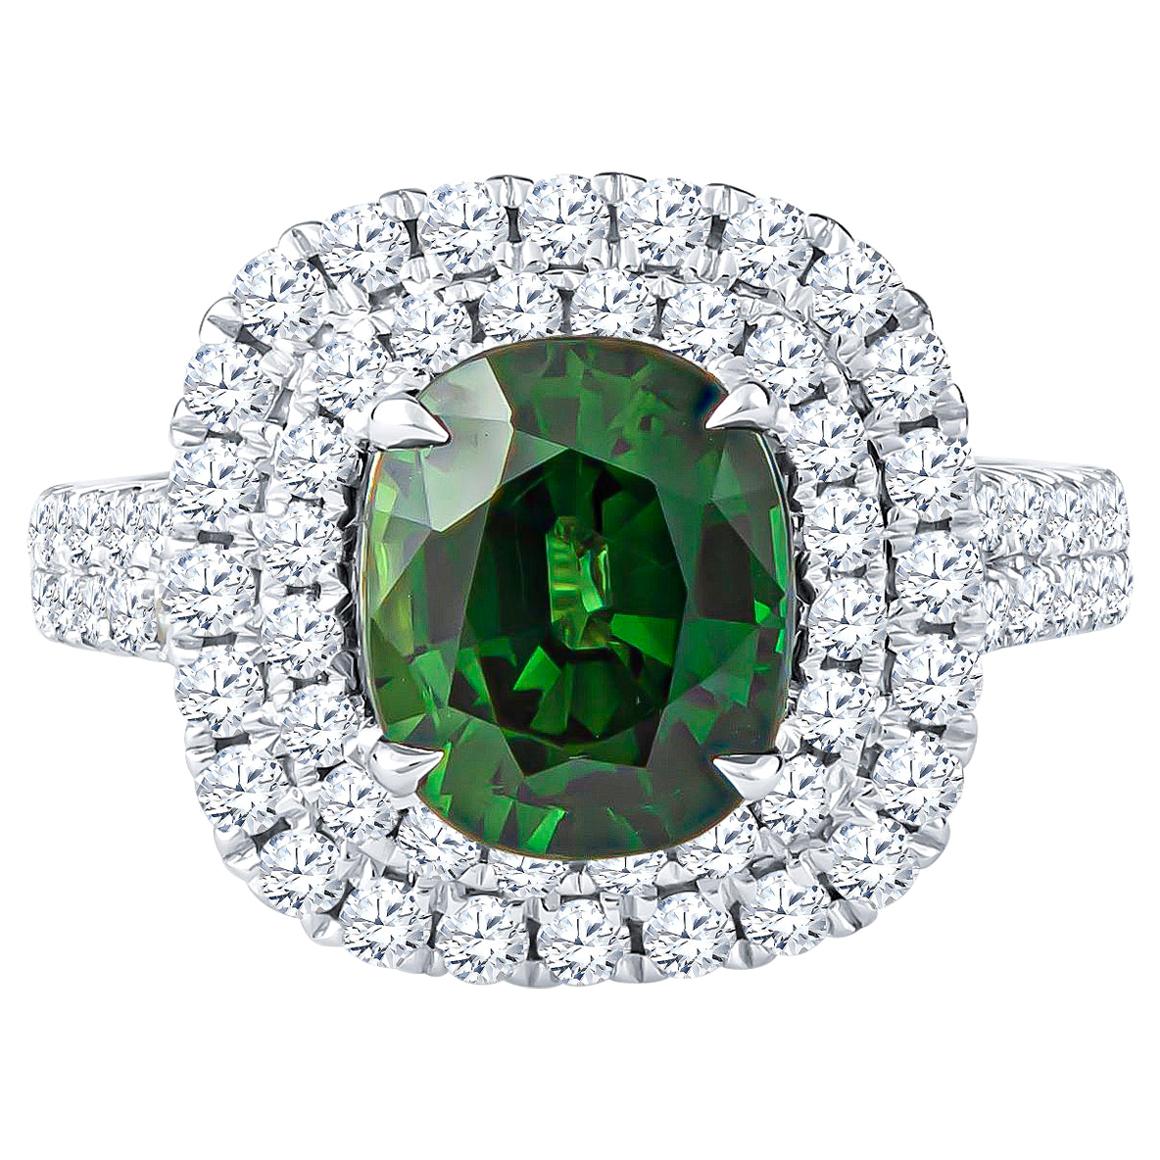 3.12 Carat Green Cushion Cut Sapphire 'GIA Lab Report' in an 18K Diamond Ring For Sale